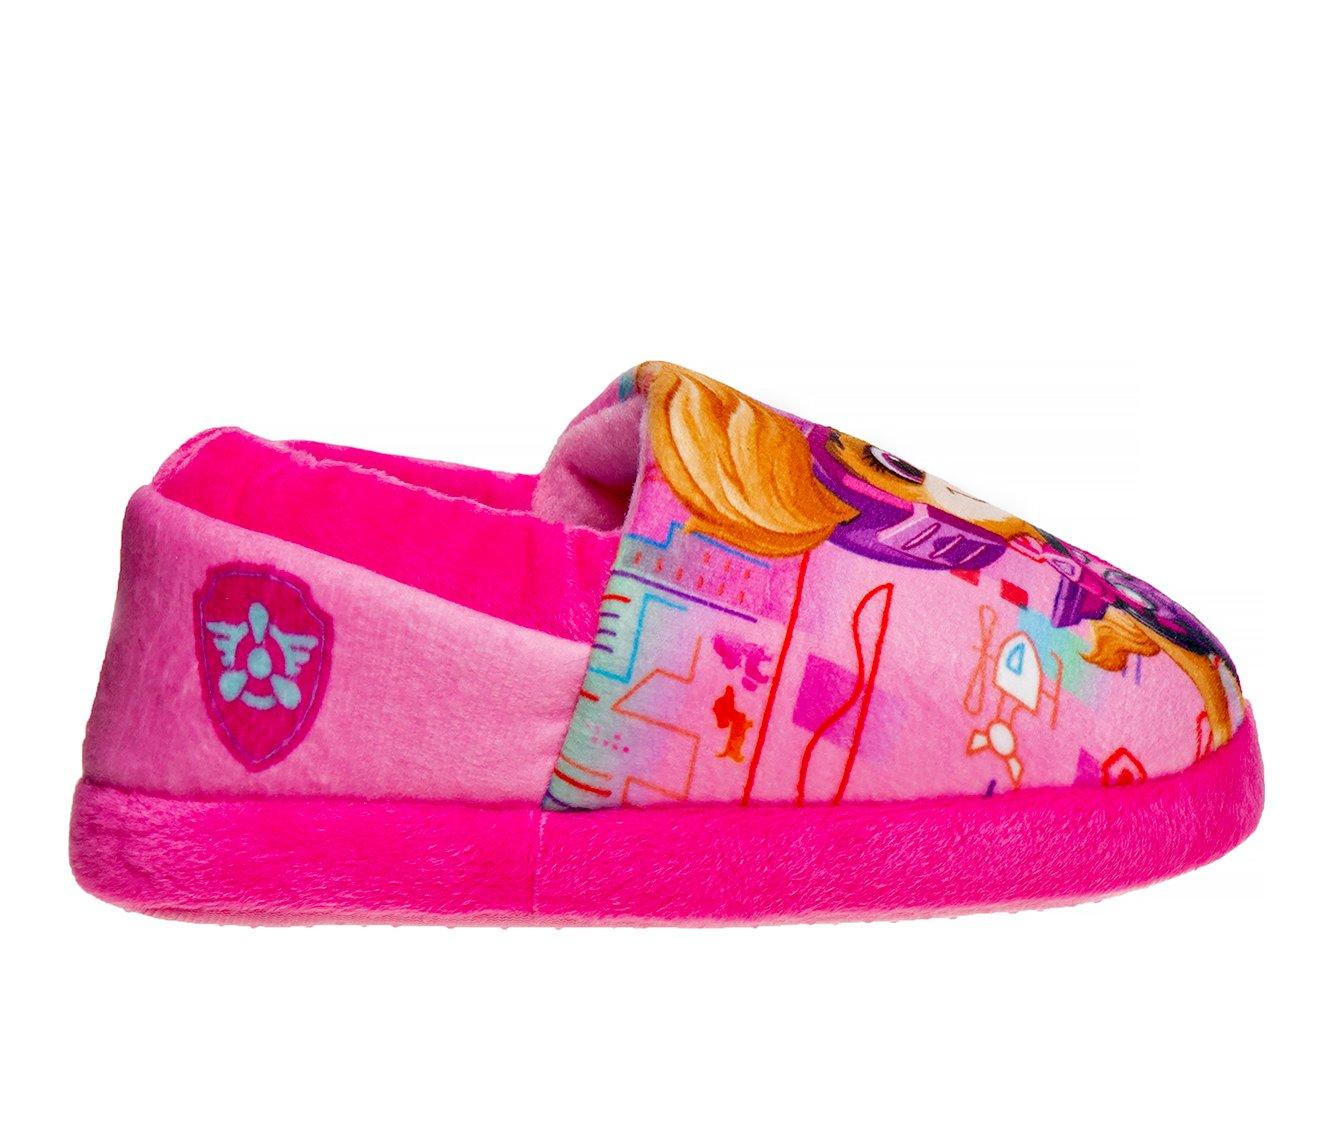 Nickelodeon Toddler & Little Kid Paw Patrol Moccasin Slippers